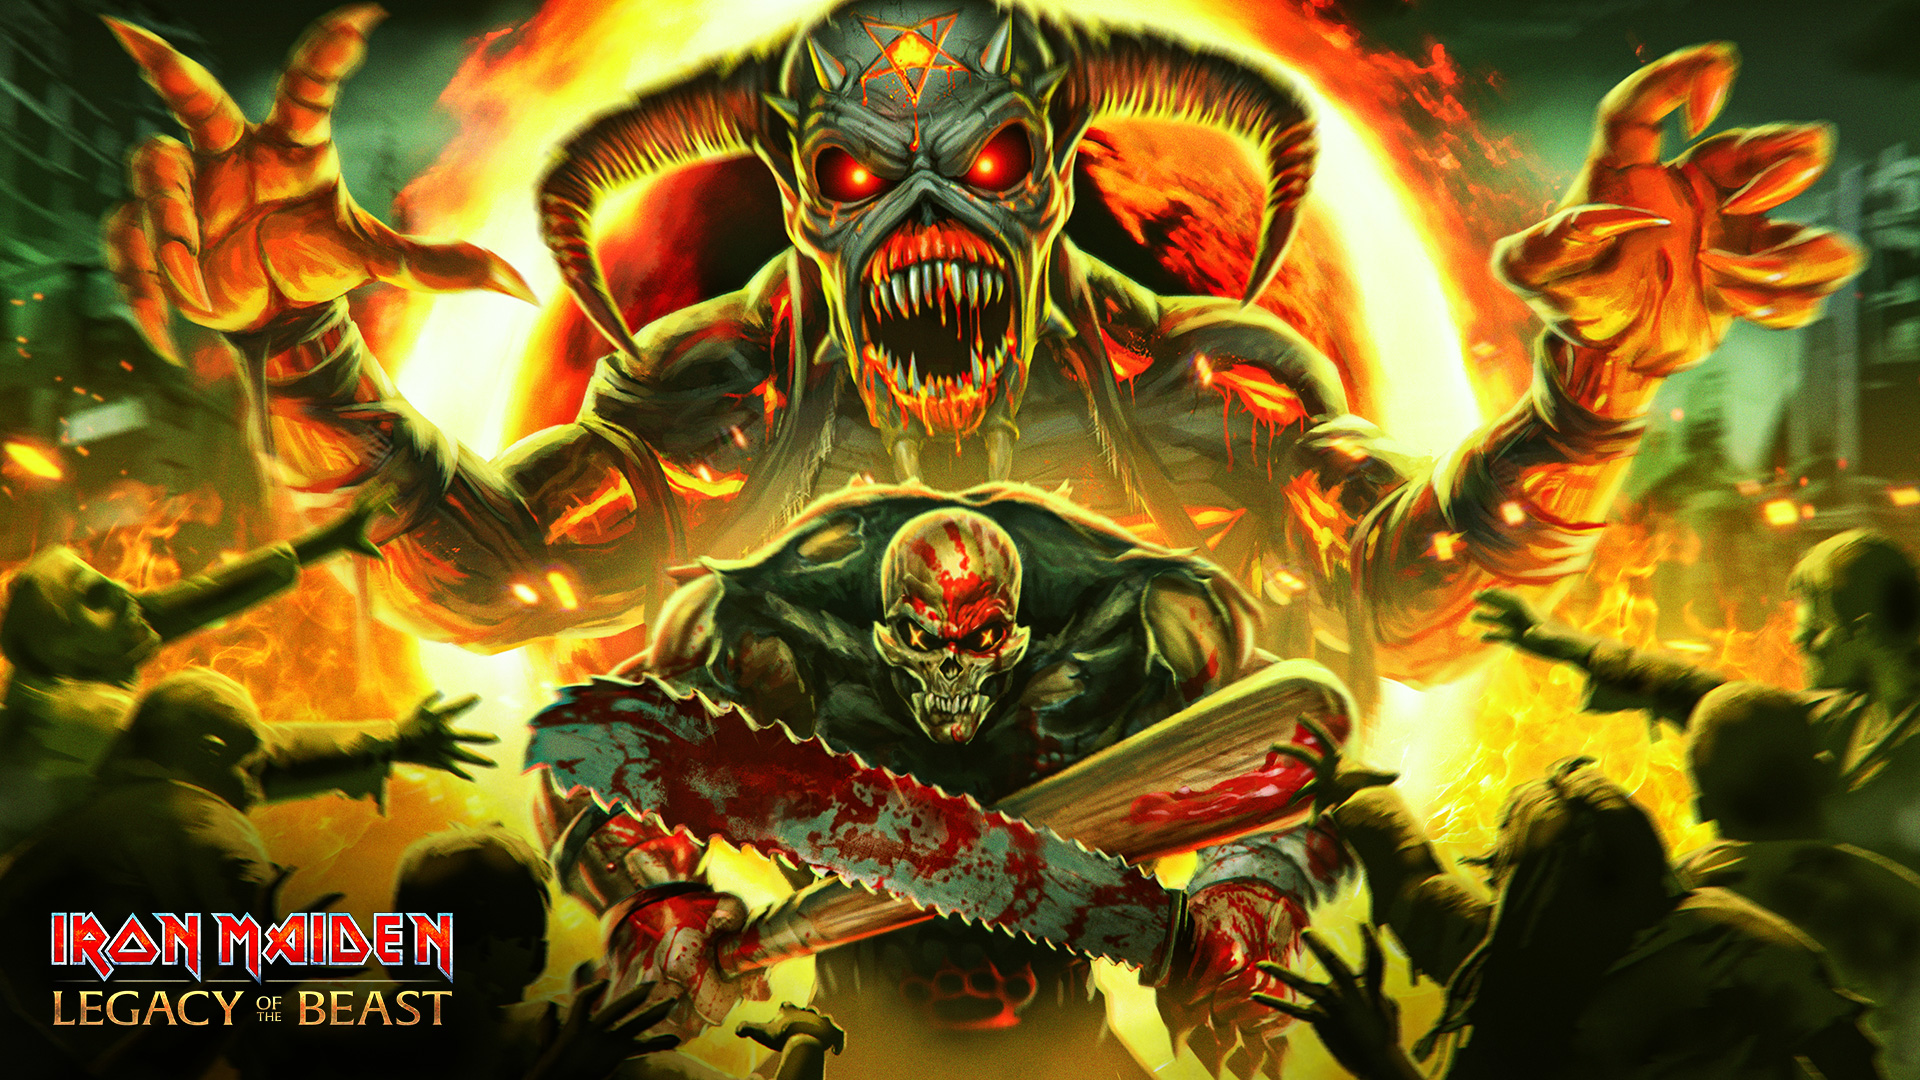 Five Finger Death Punch Collab  Iron Maiden Legacy of the Beast